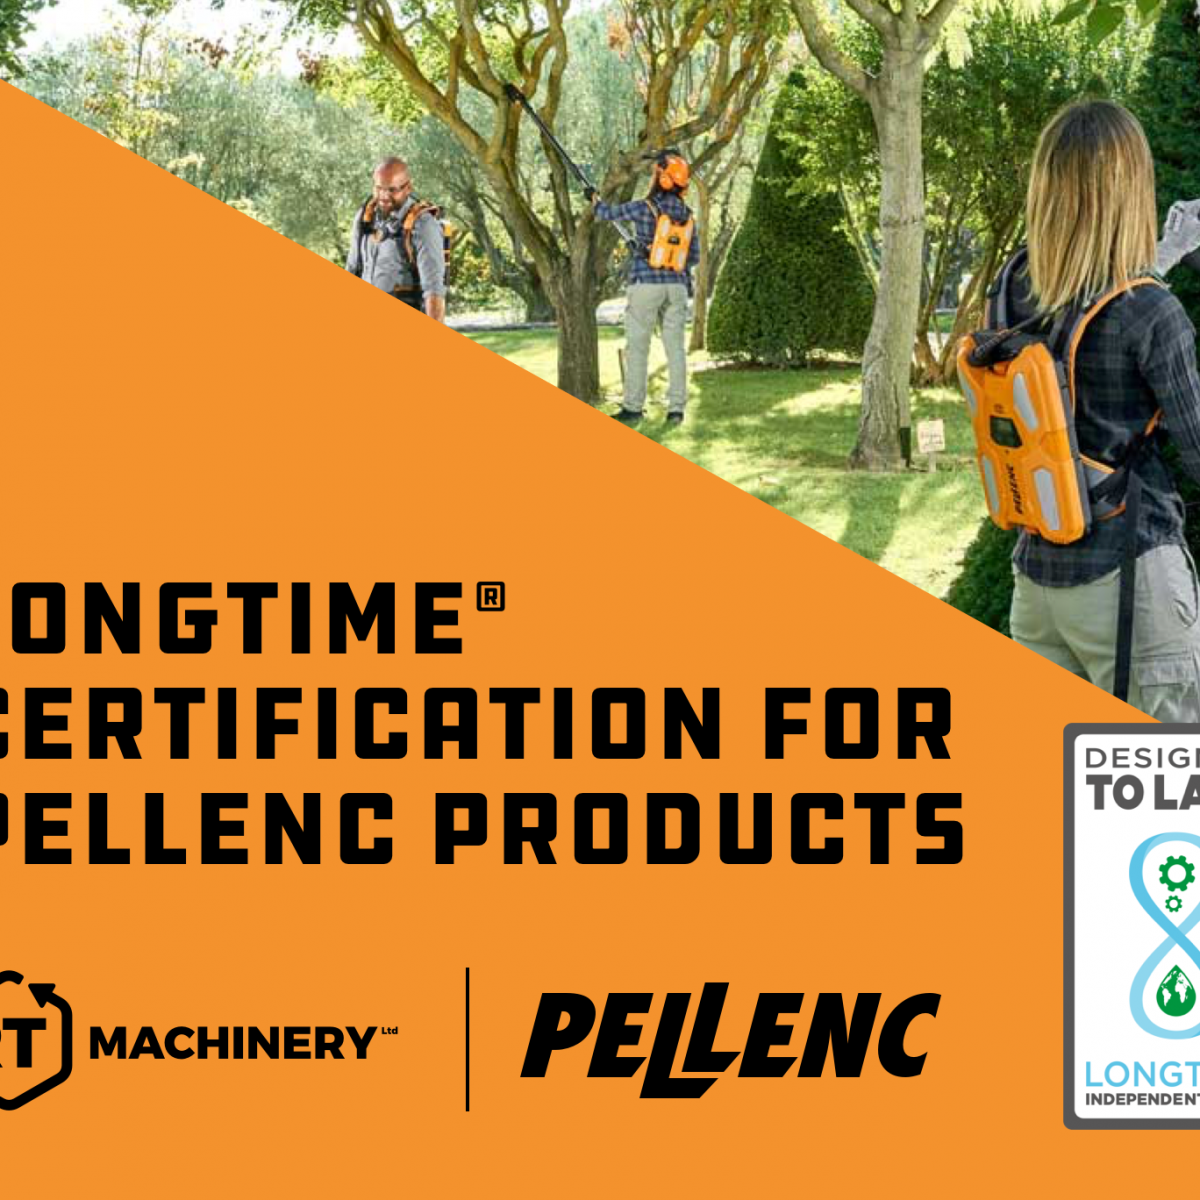 LONGTIME® Certification for Pellenc Products